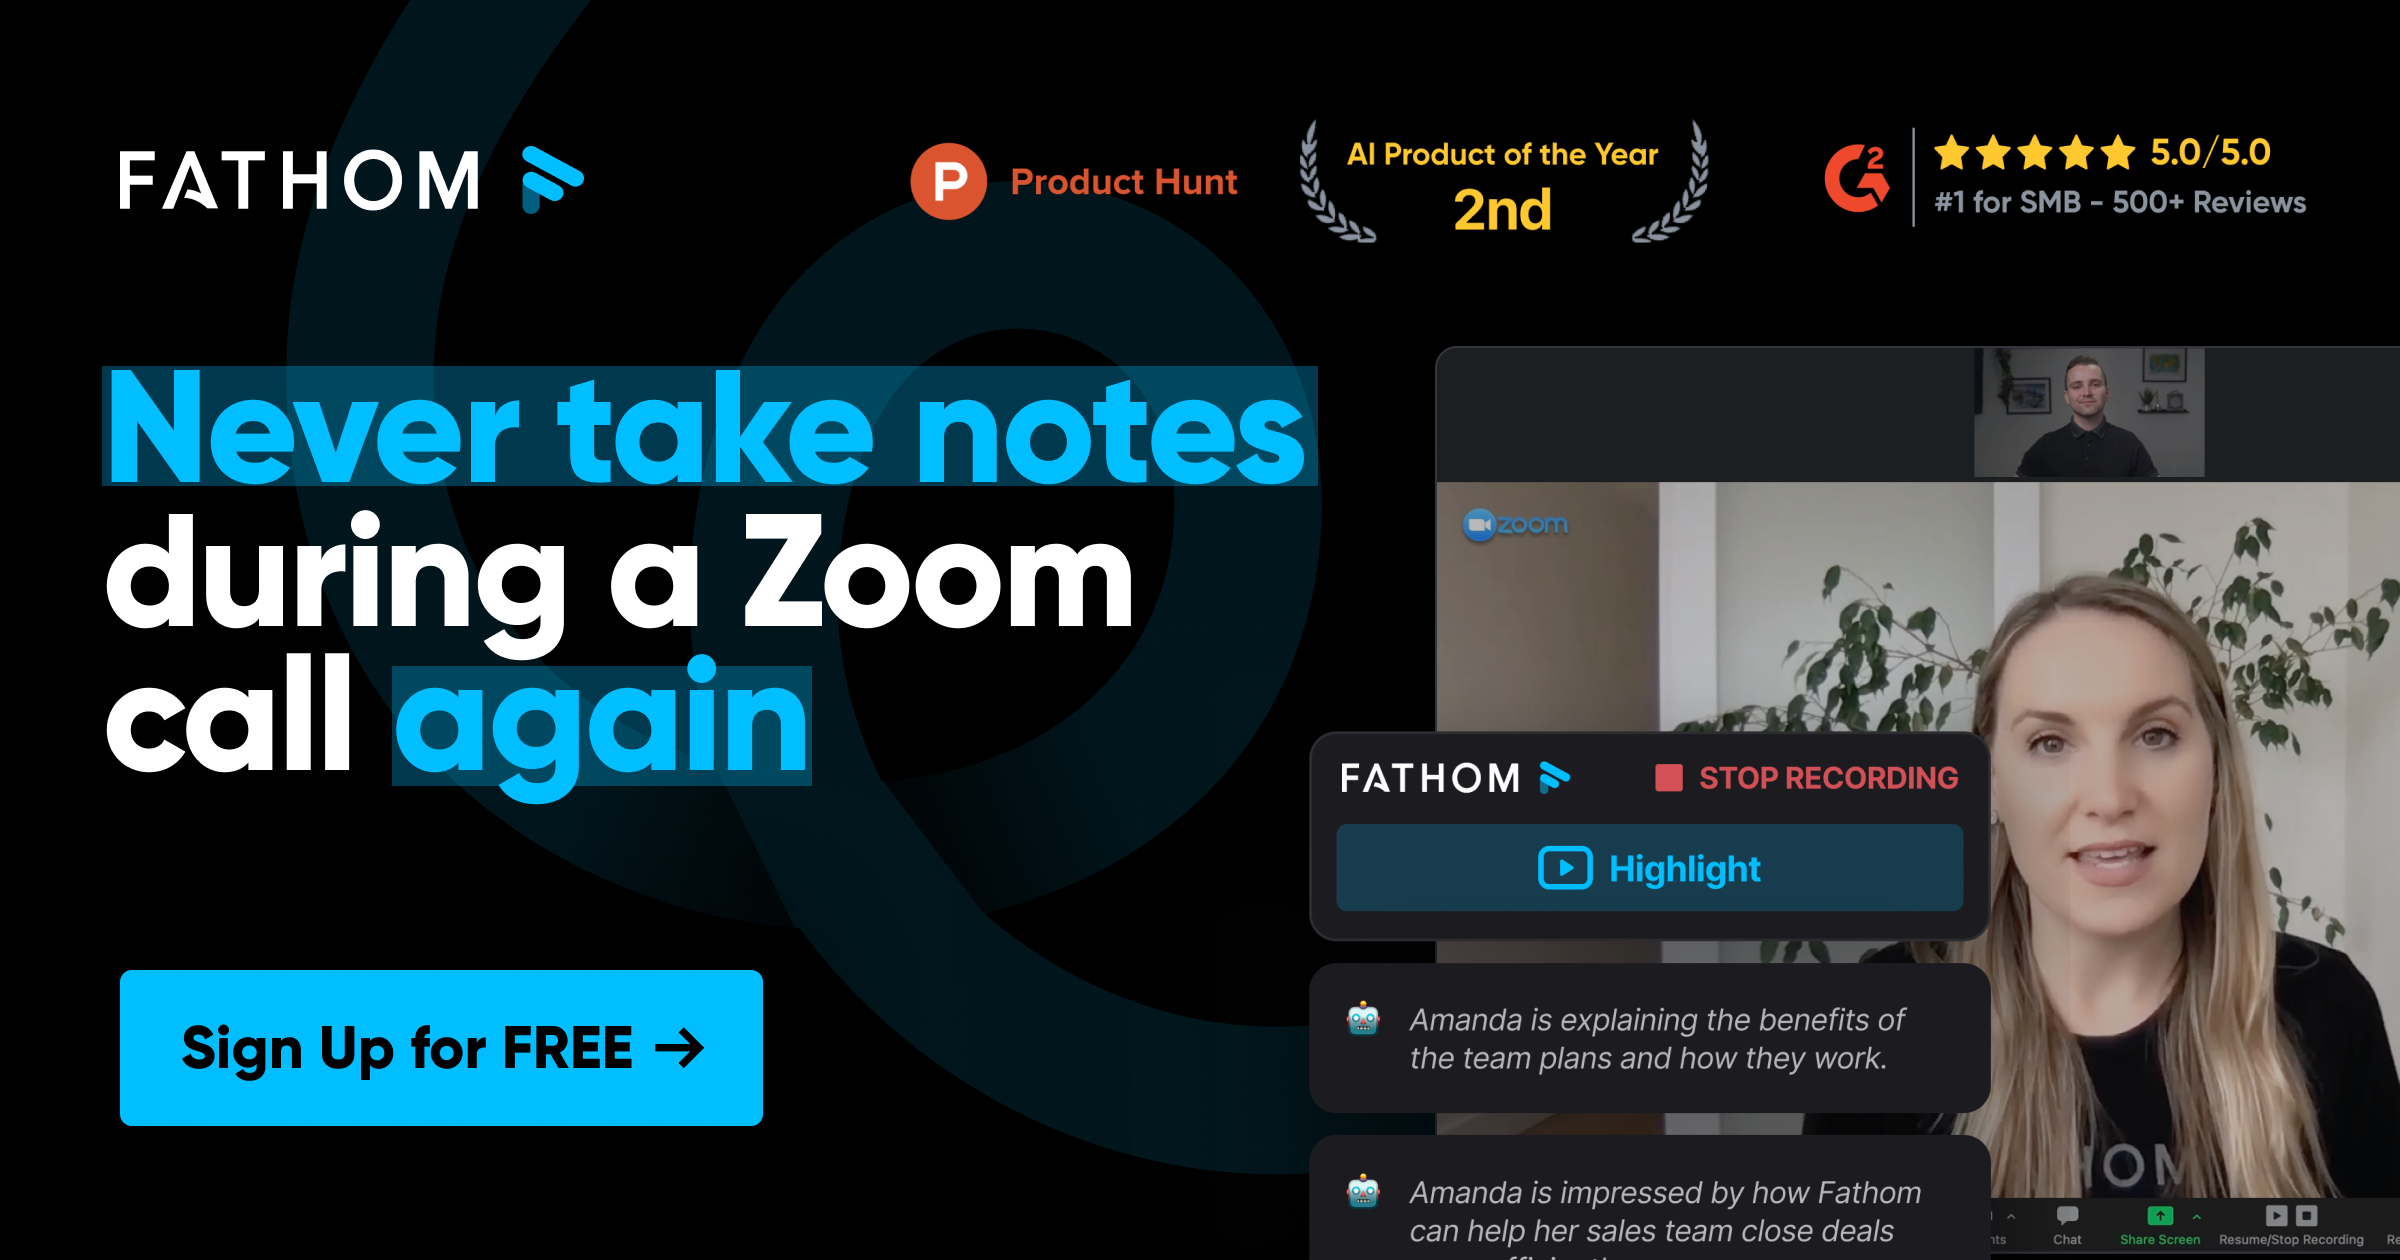 Fathom - A meeting assistant to transcribe and summarizes meetings